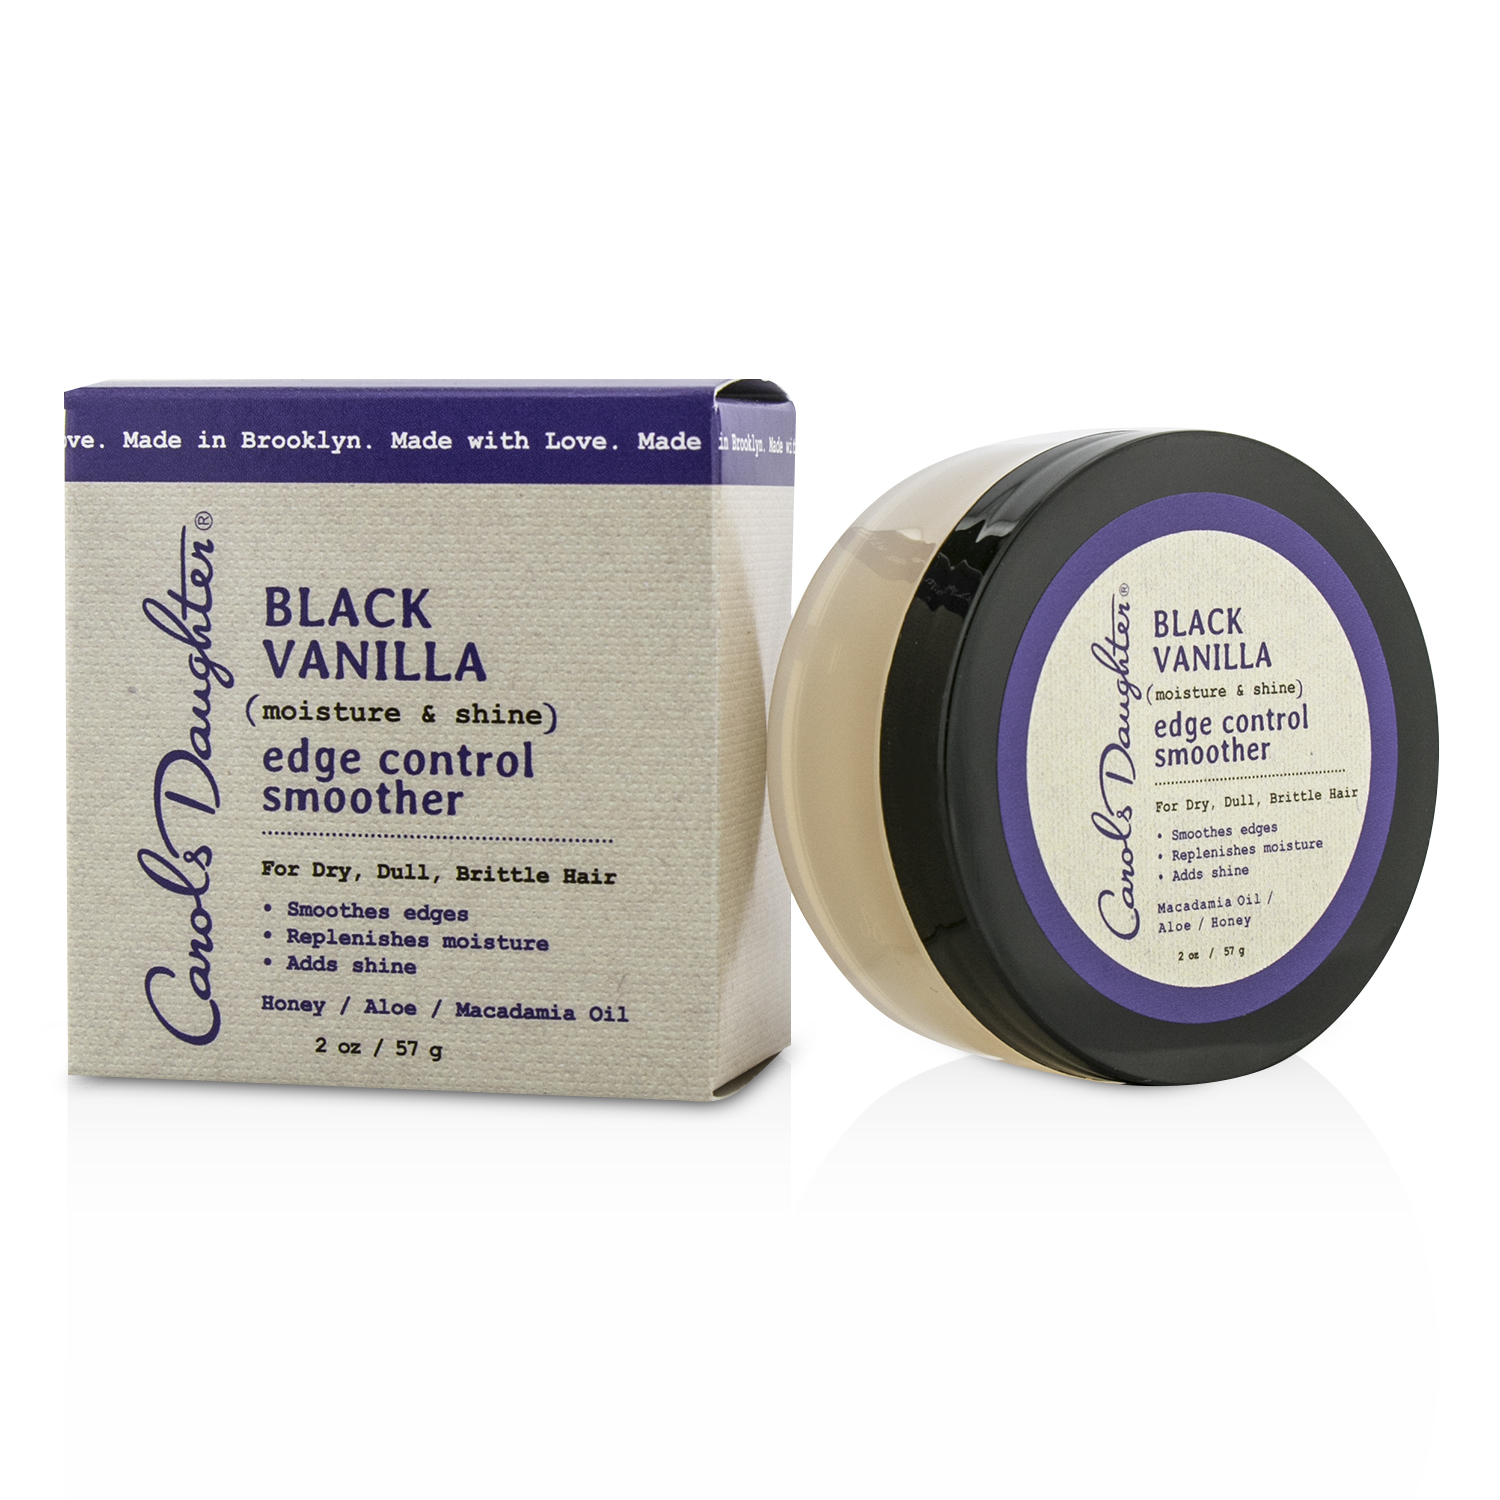 Black Vanilla Moisture & Shine Edge Control Smoother (For Dry Dull or Brittle Hair) Carols Daughter Image